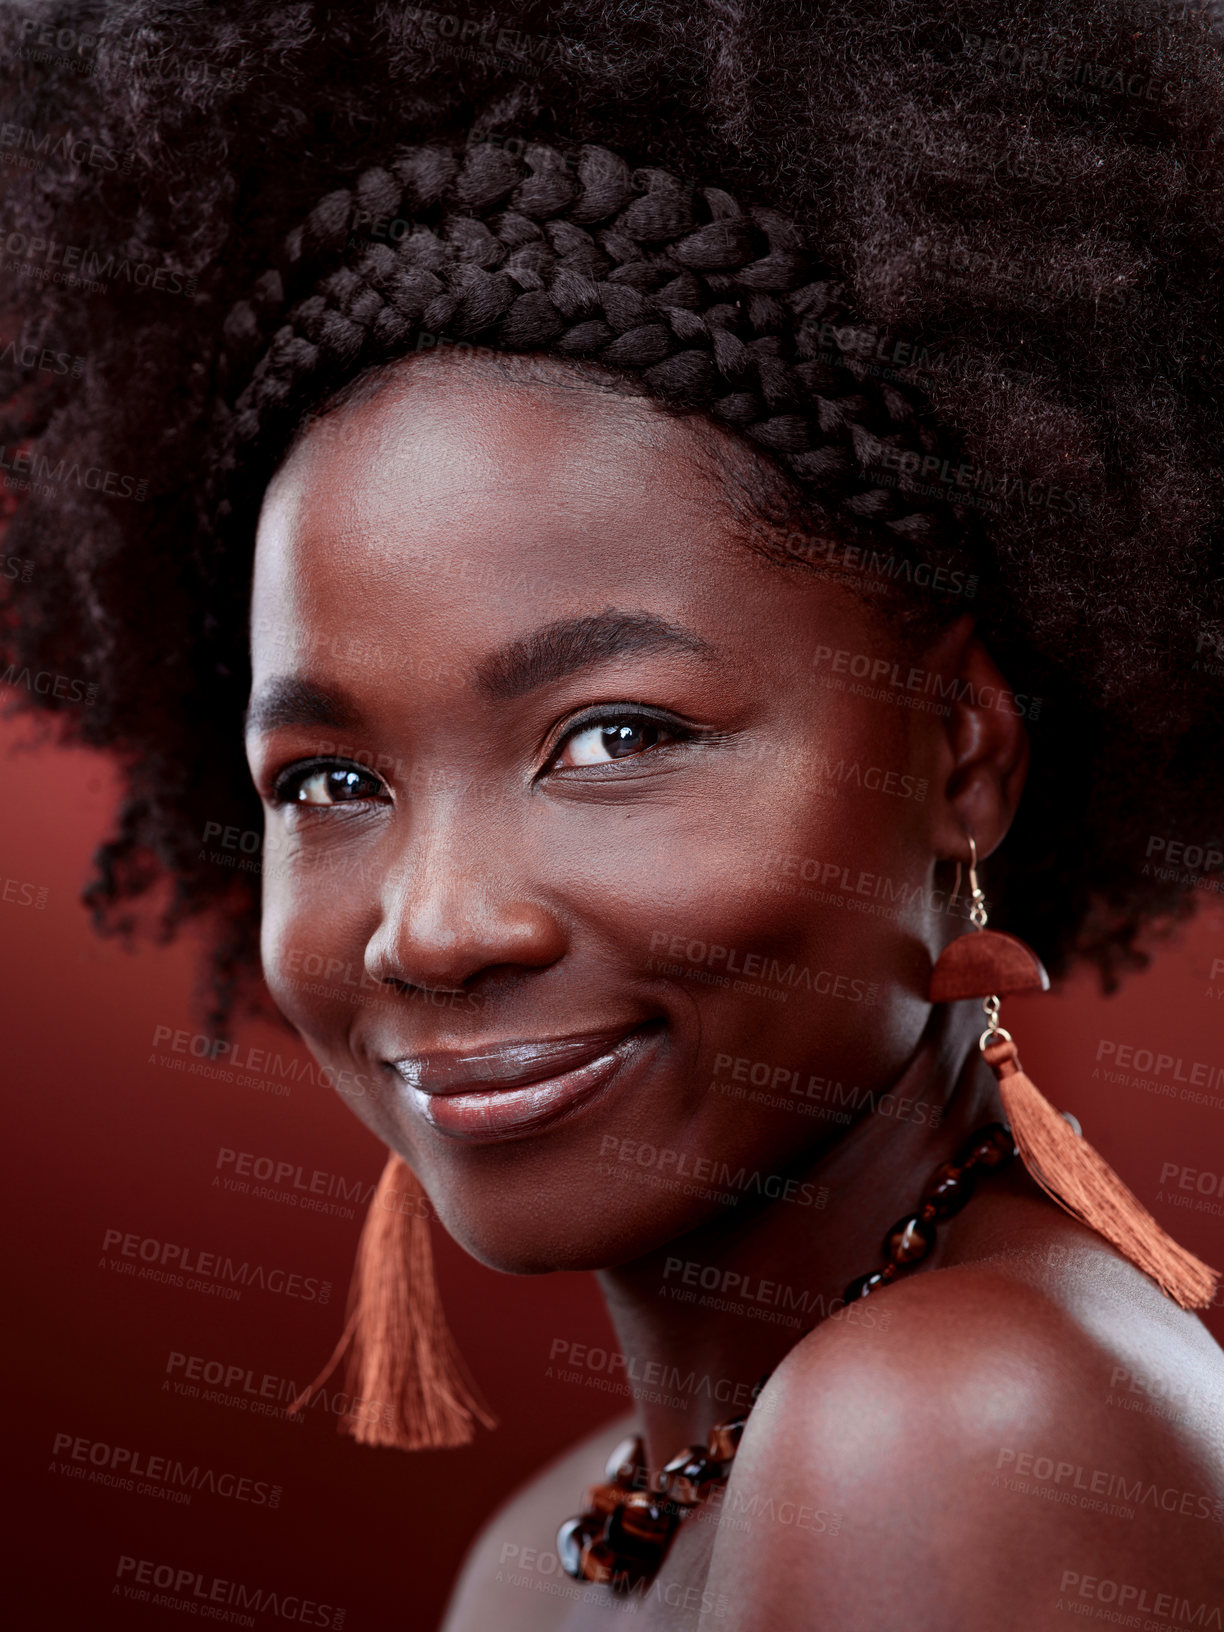 Buy stock photo Cropped portrait of a beautiful young woman posing against a red background